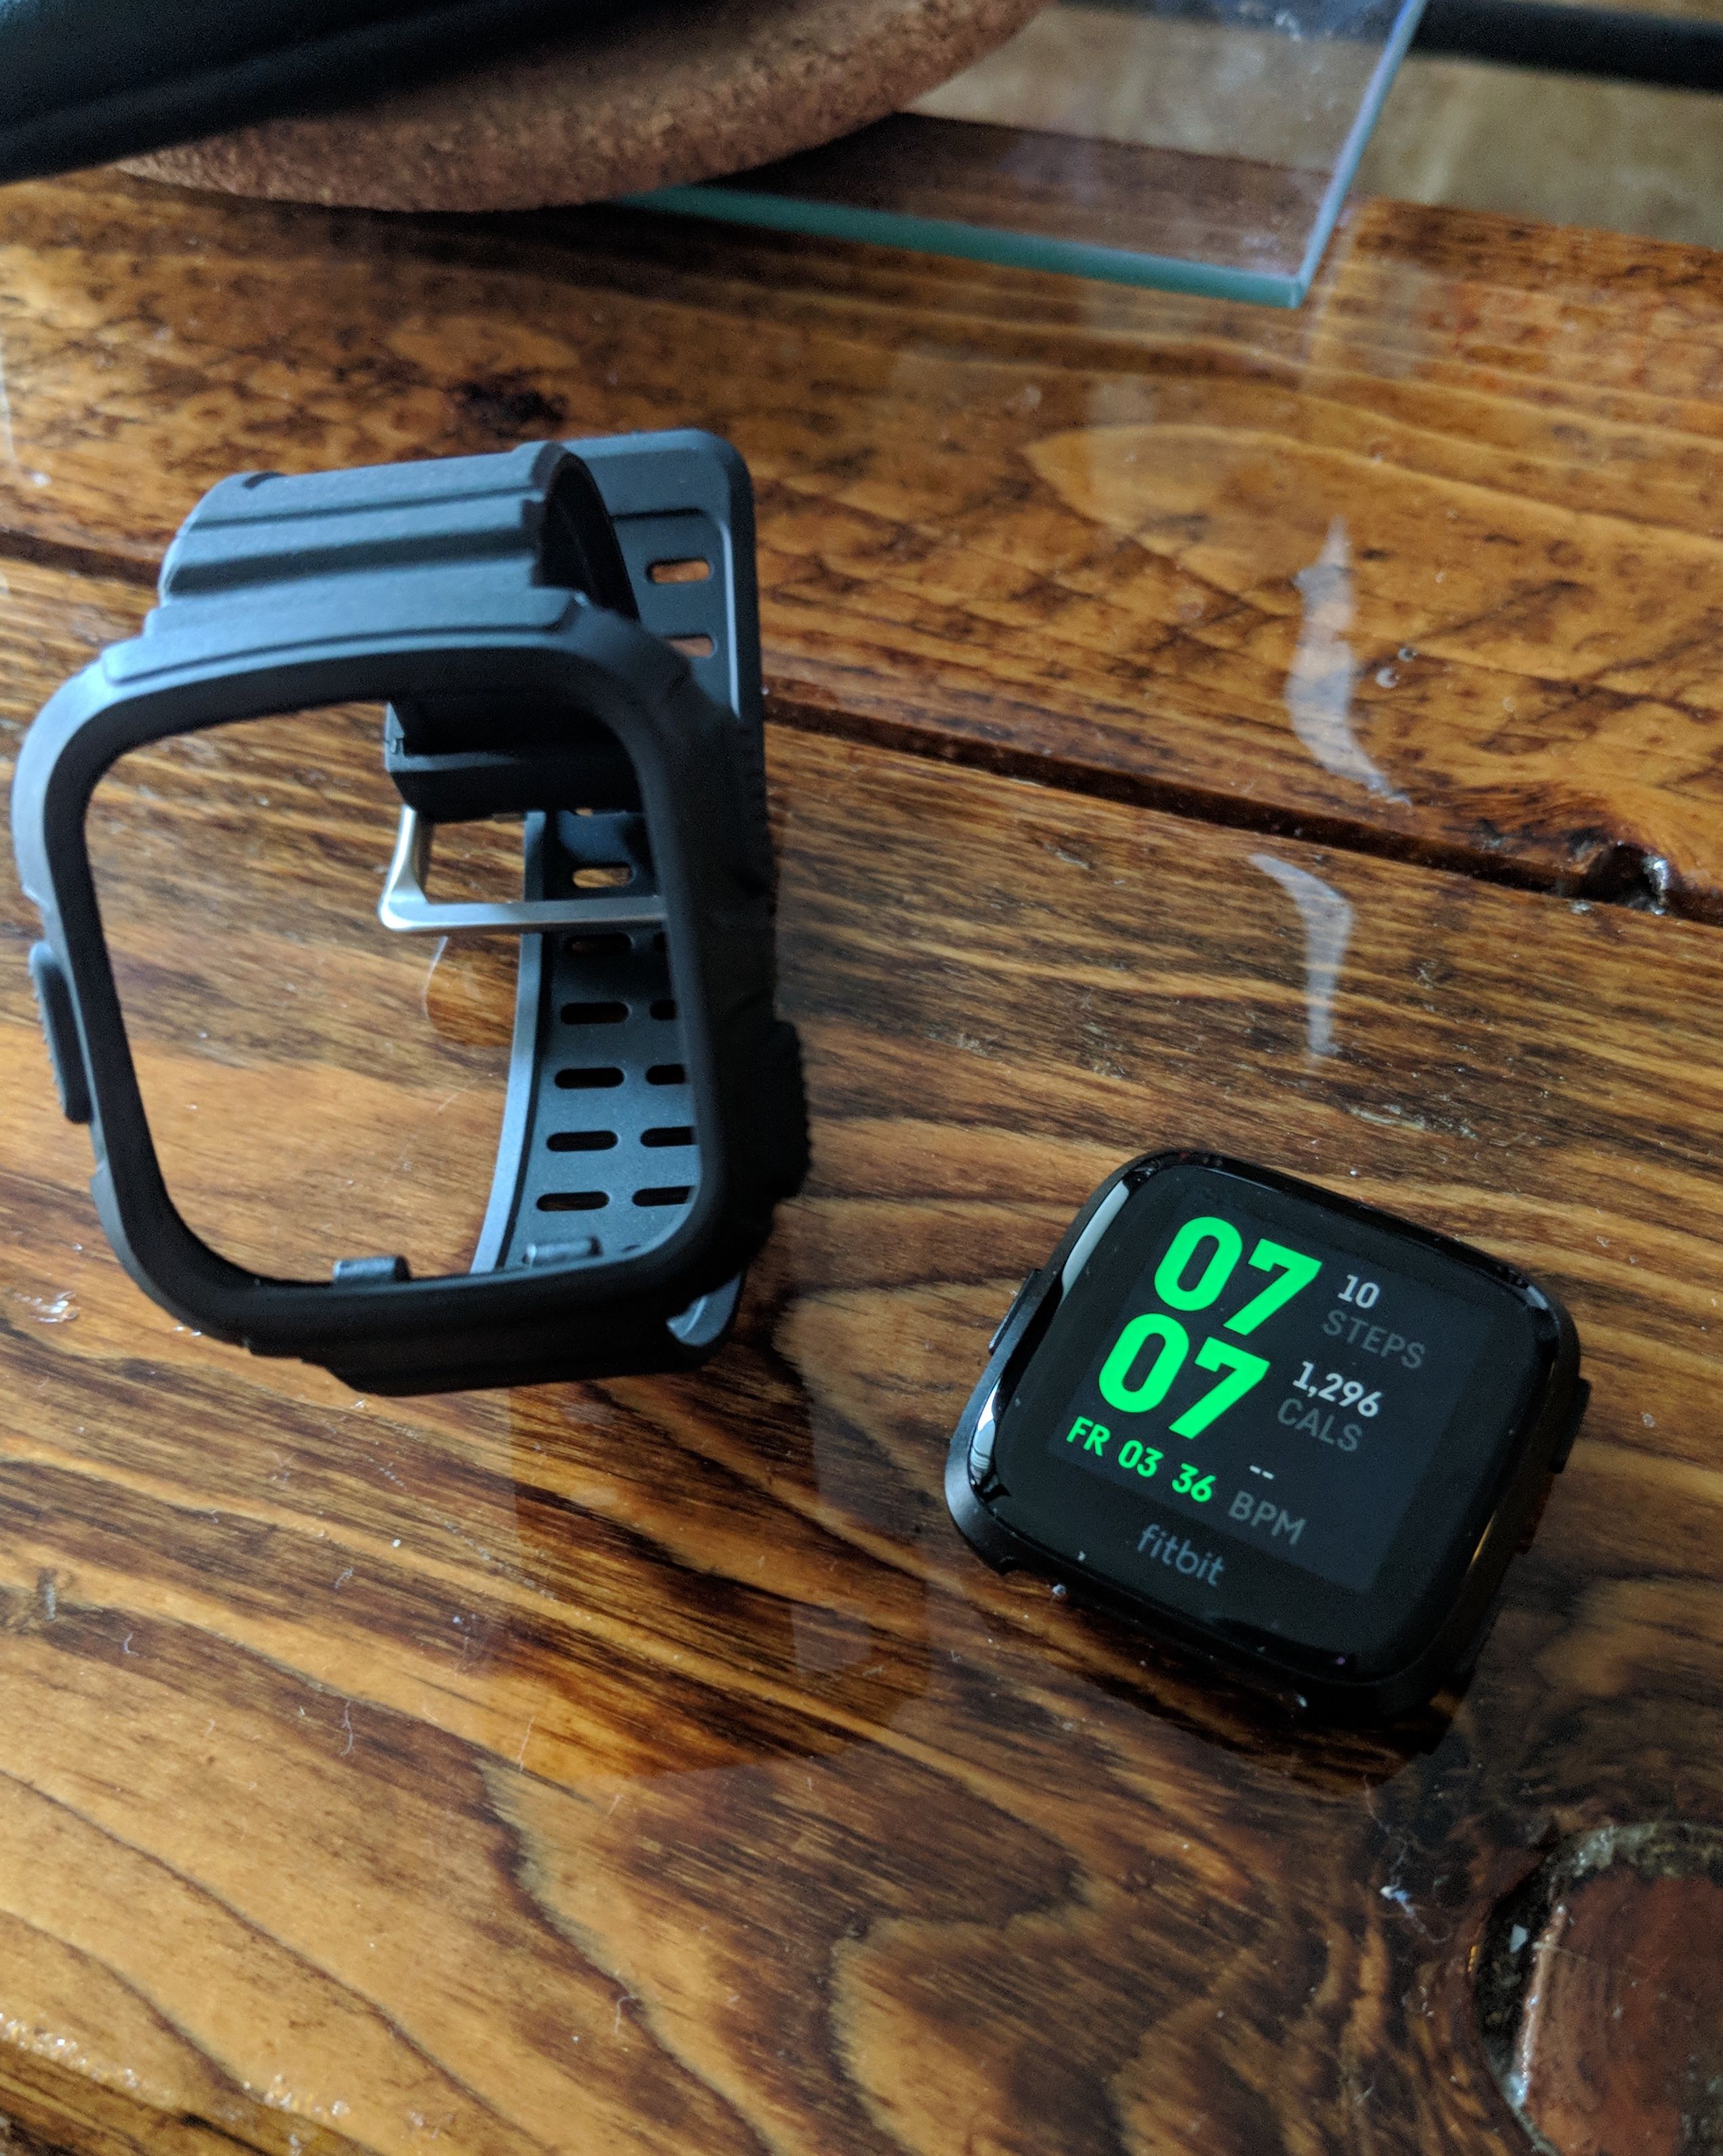 how to change strap on fitbit versa 2